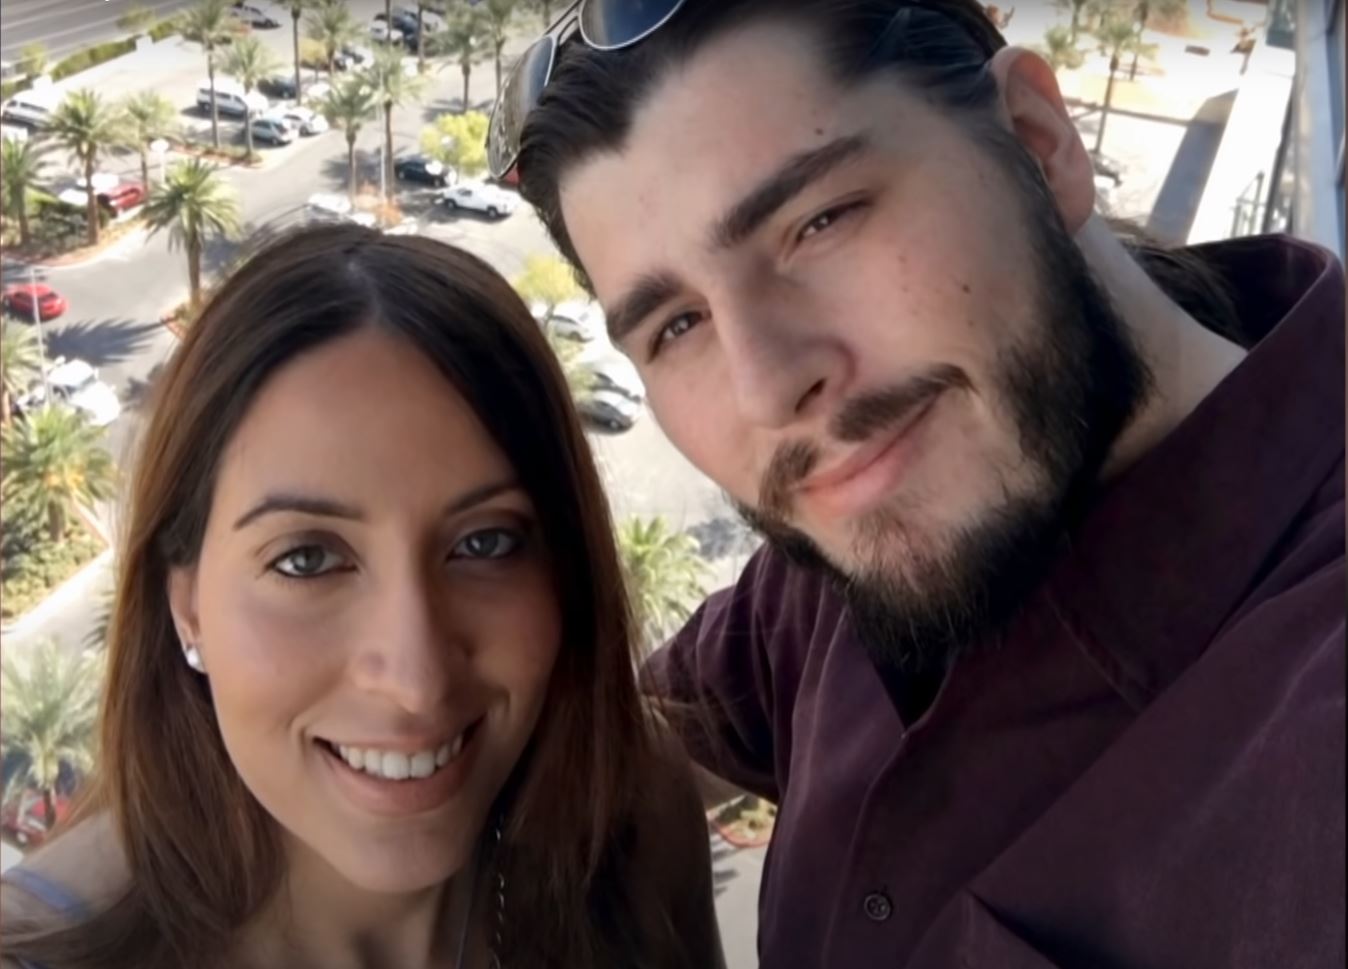 90 Day Fiancé stars Andrew and Amira